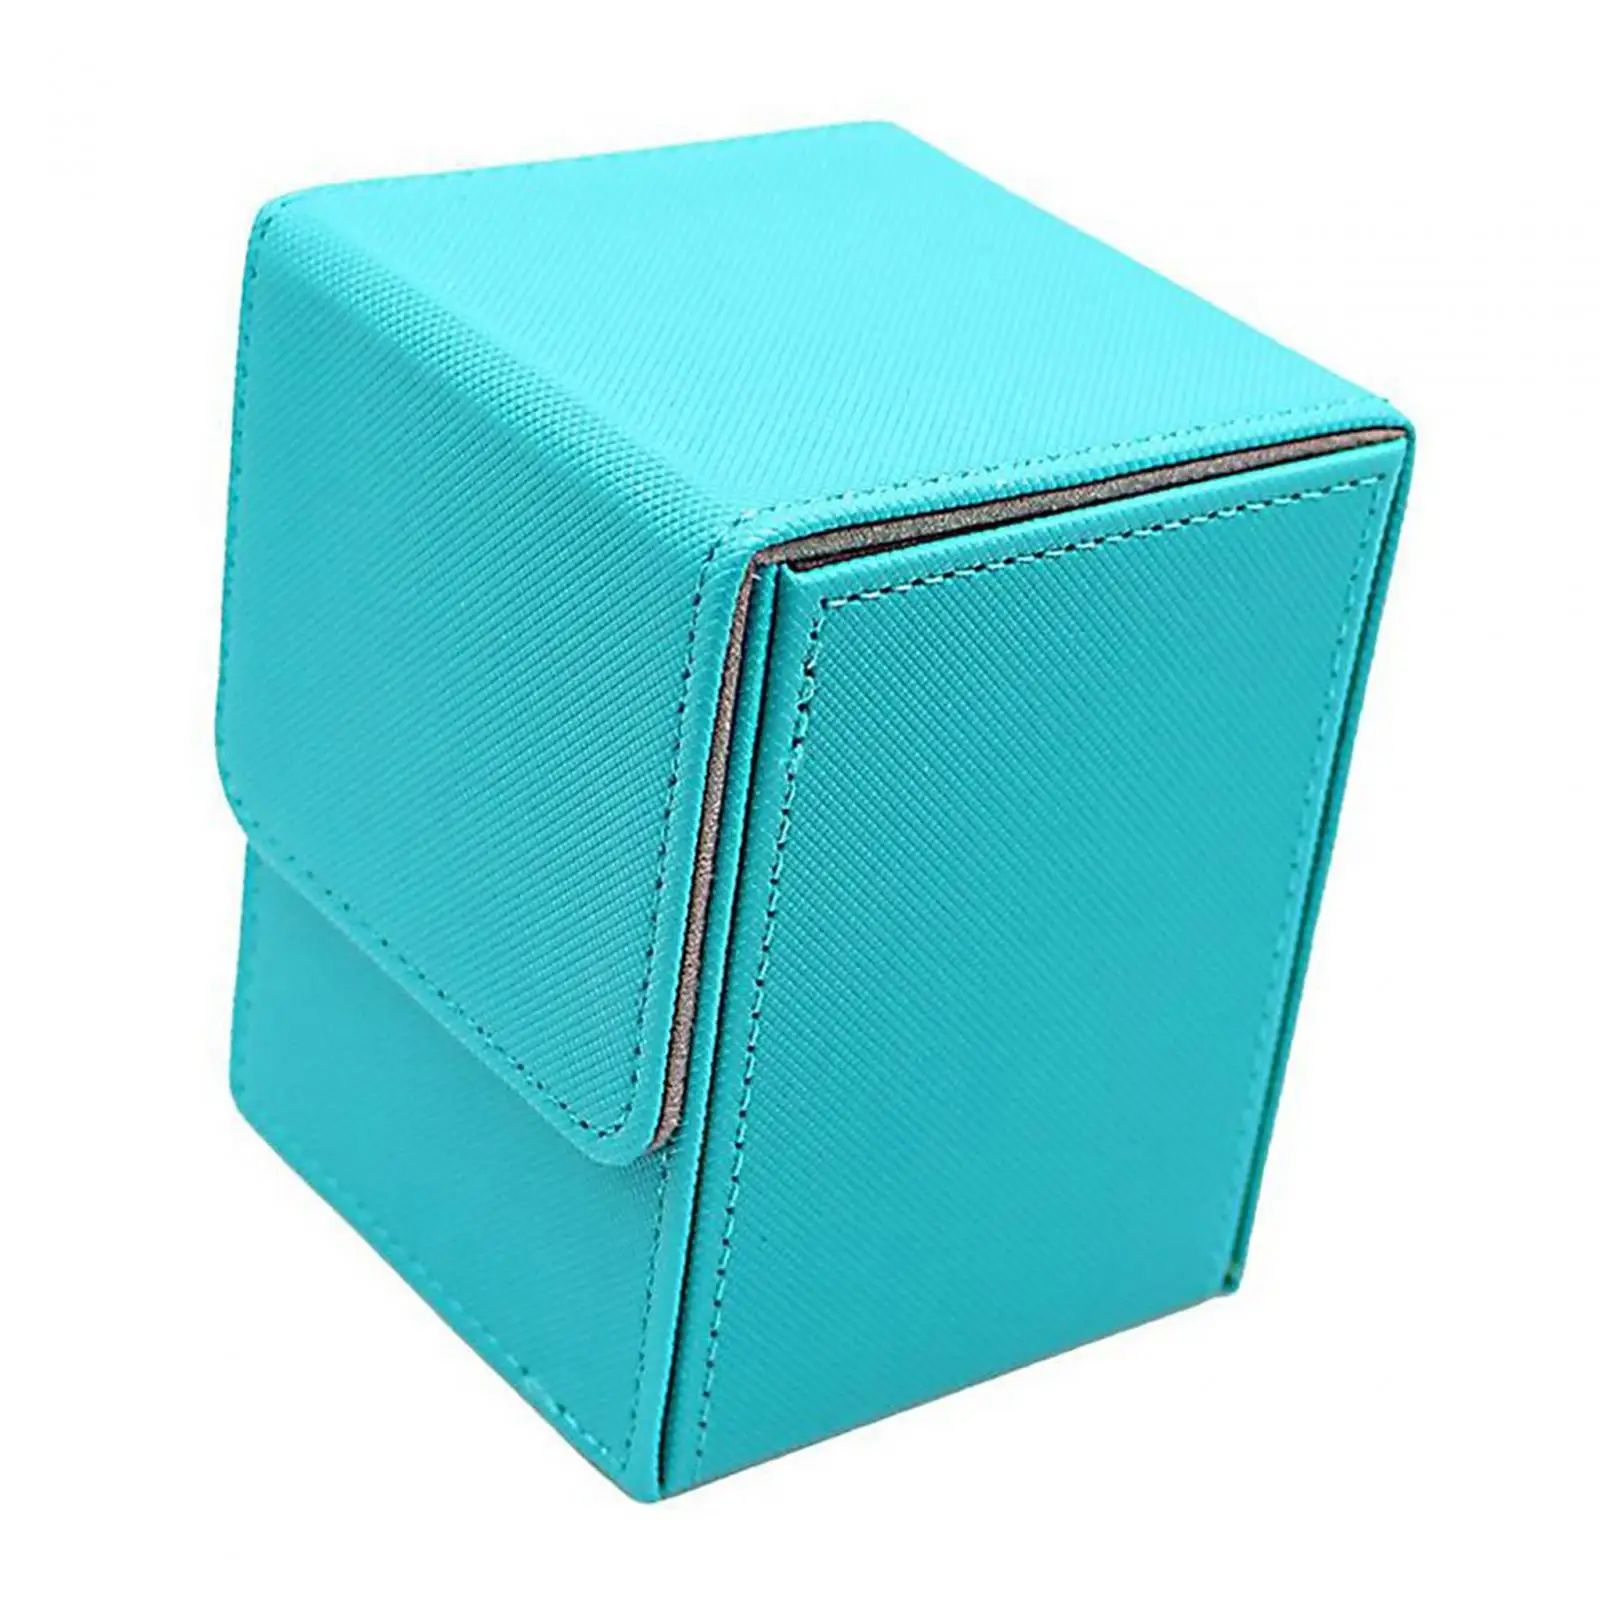 Trading Card Deck Case PU Leather Display Holds 100 Cards Kids Children Storage Gathering Card Toy Card Cards Case